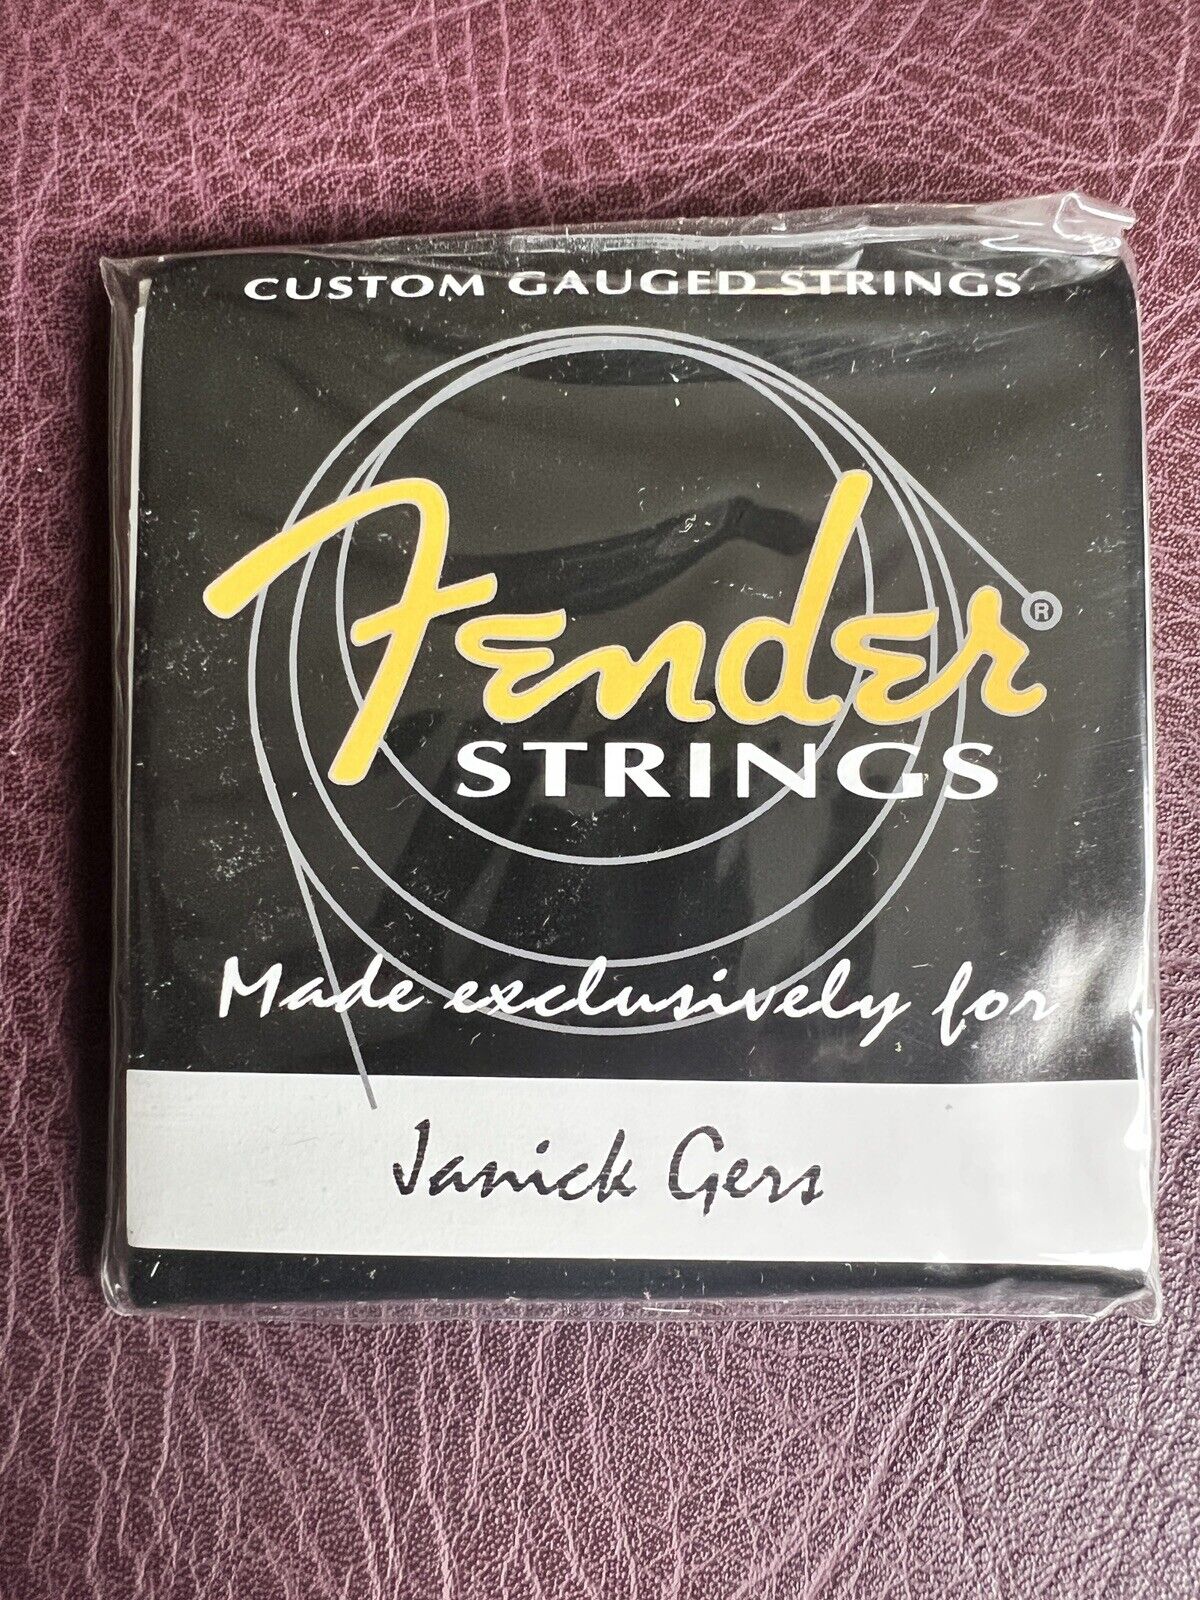 IRON MAIDEN - Janick Gers Custom Band Issue Fender Tour Guitar Strings 